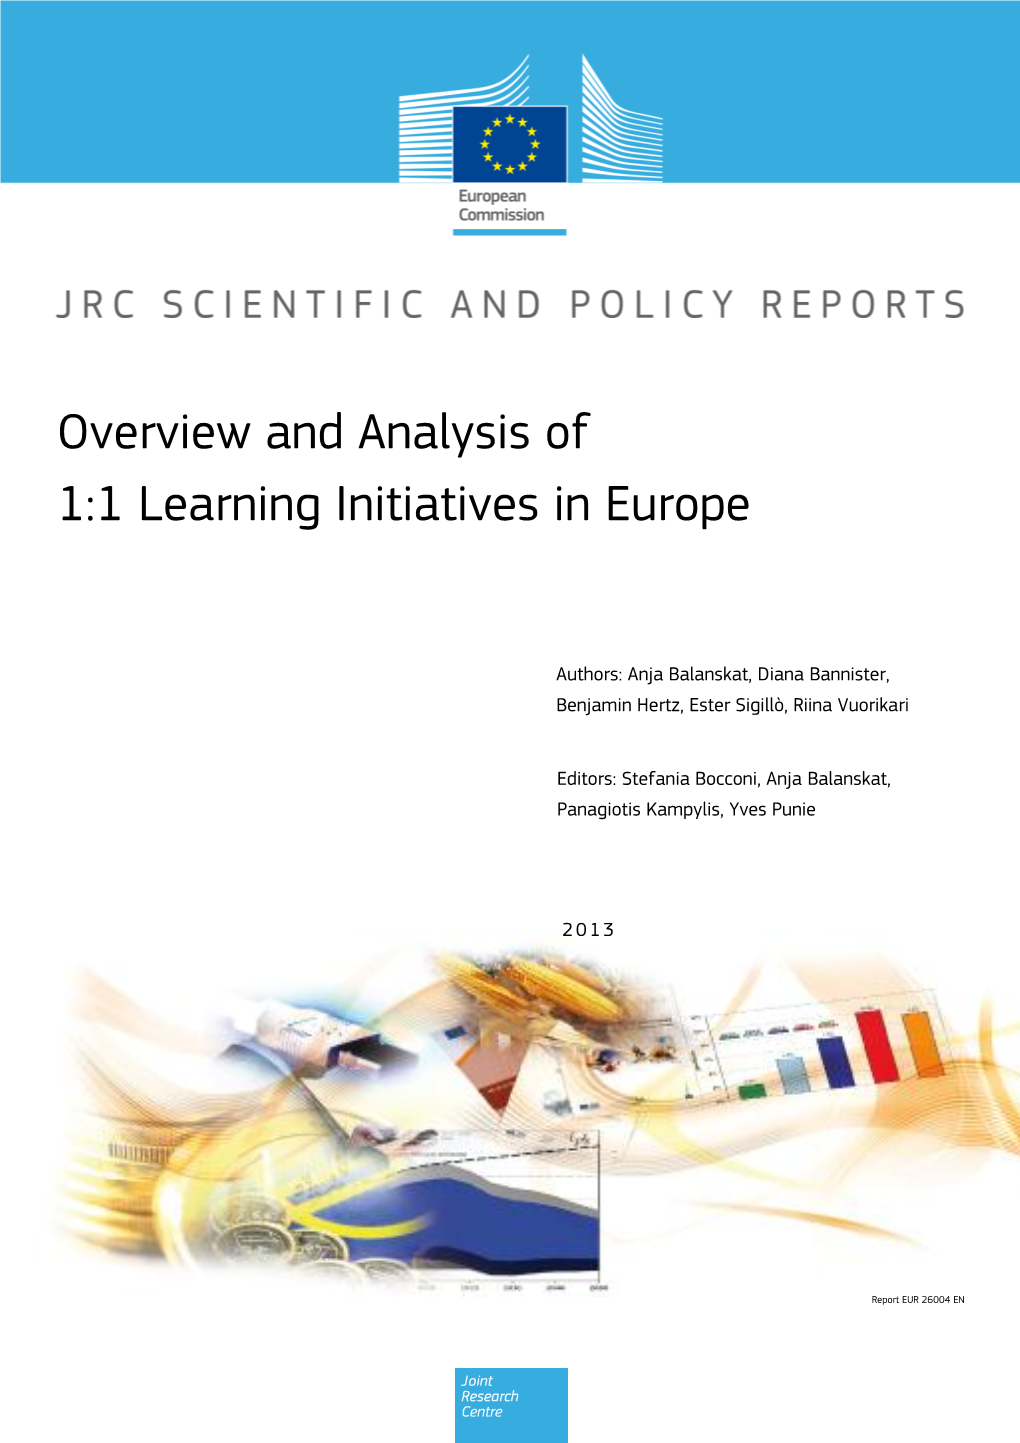 Overview and Analysis of 1:1 Learning Initiatives in Europe